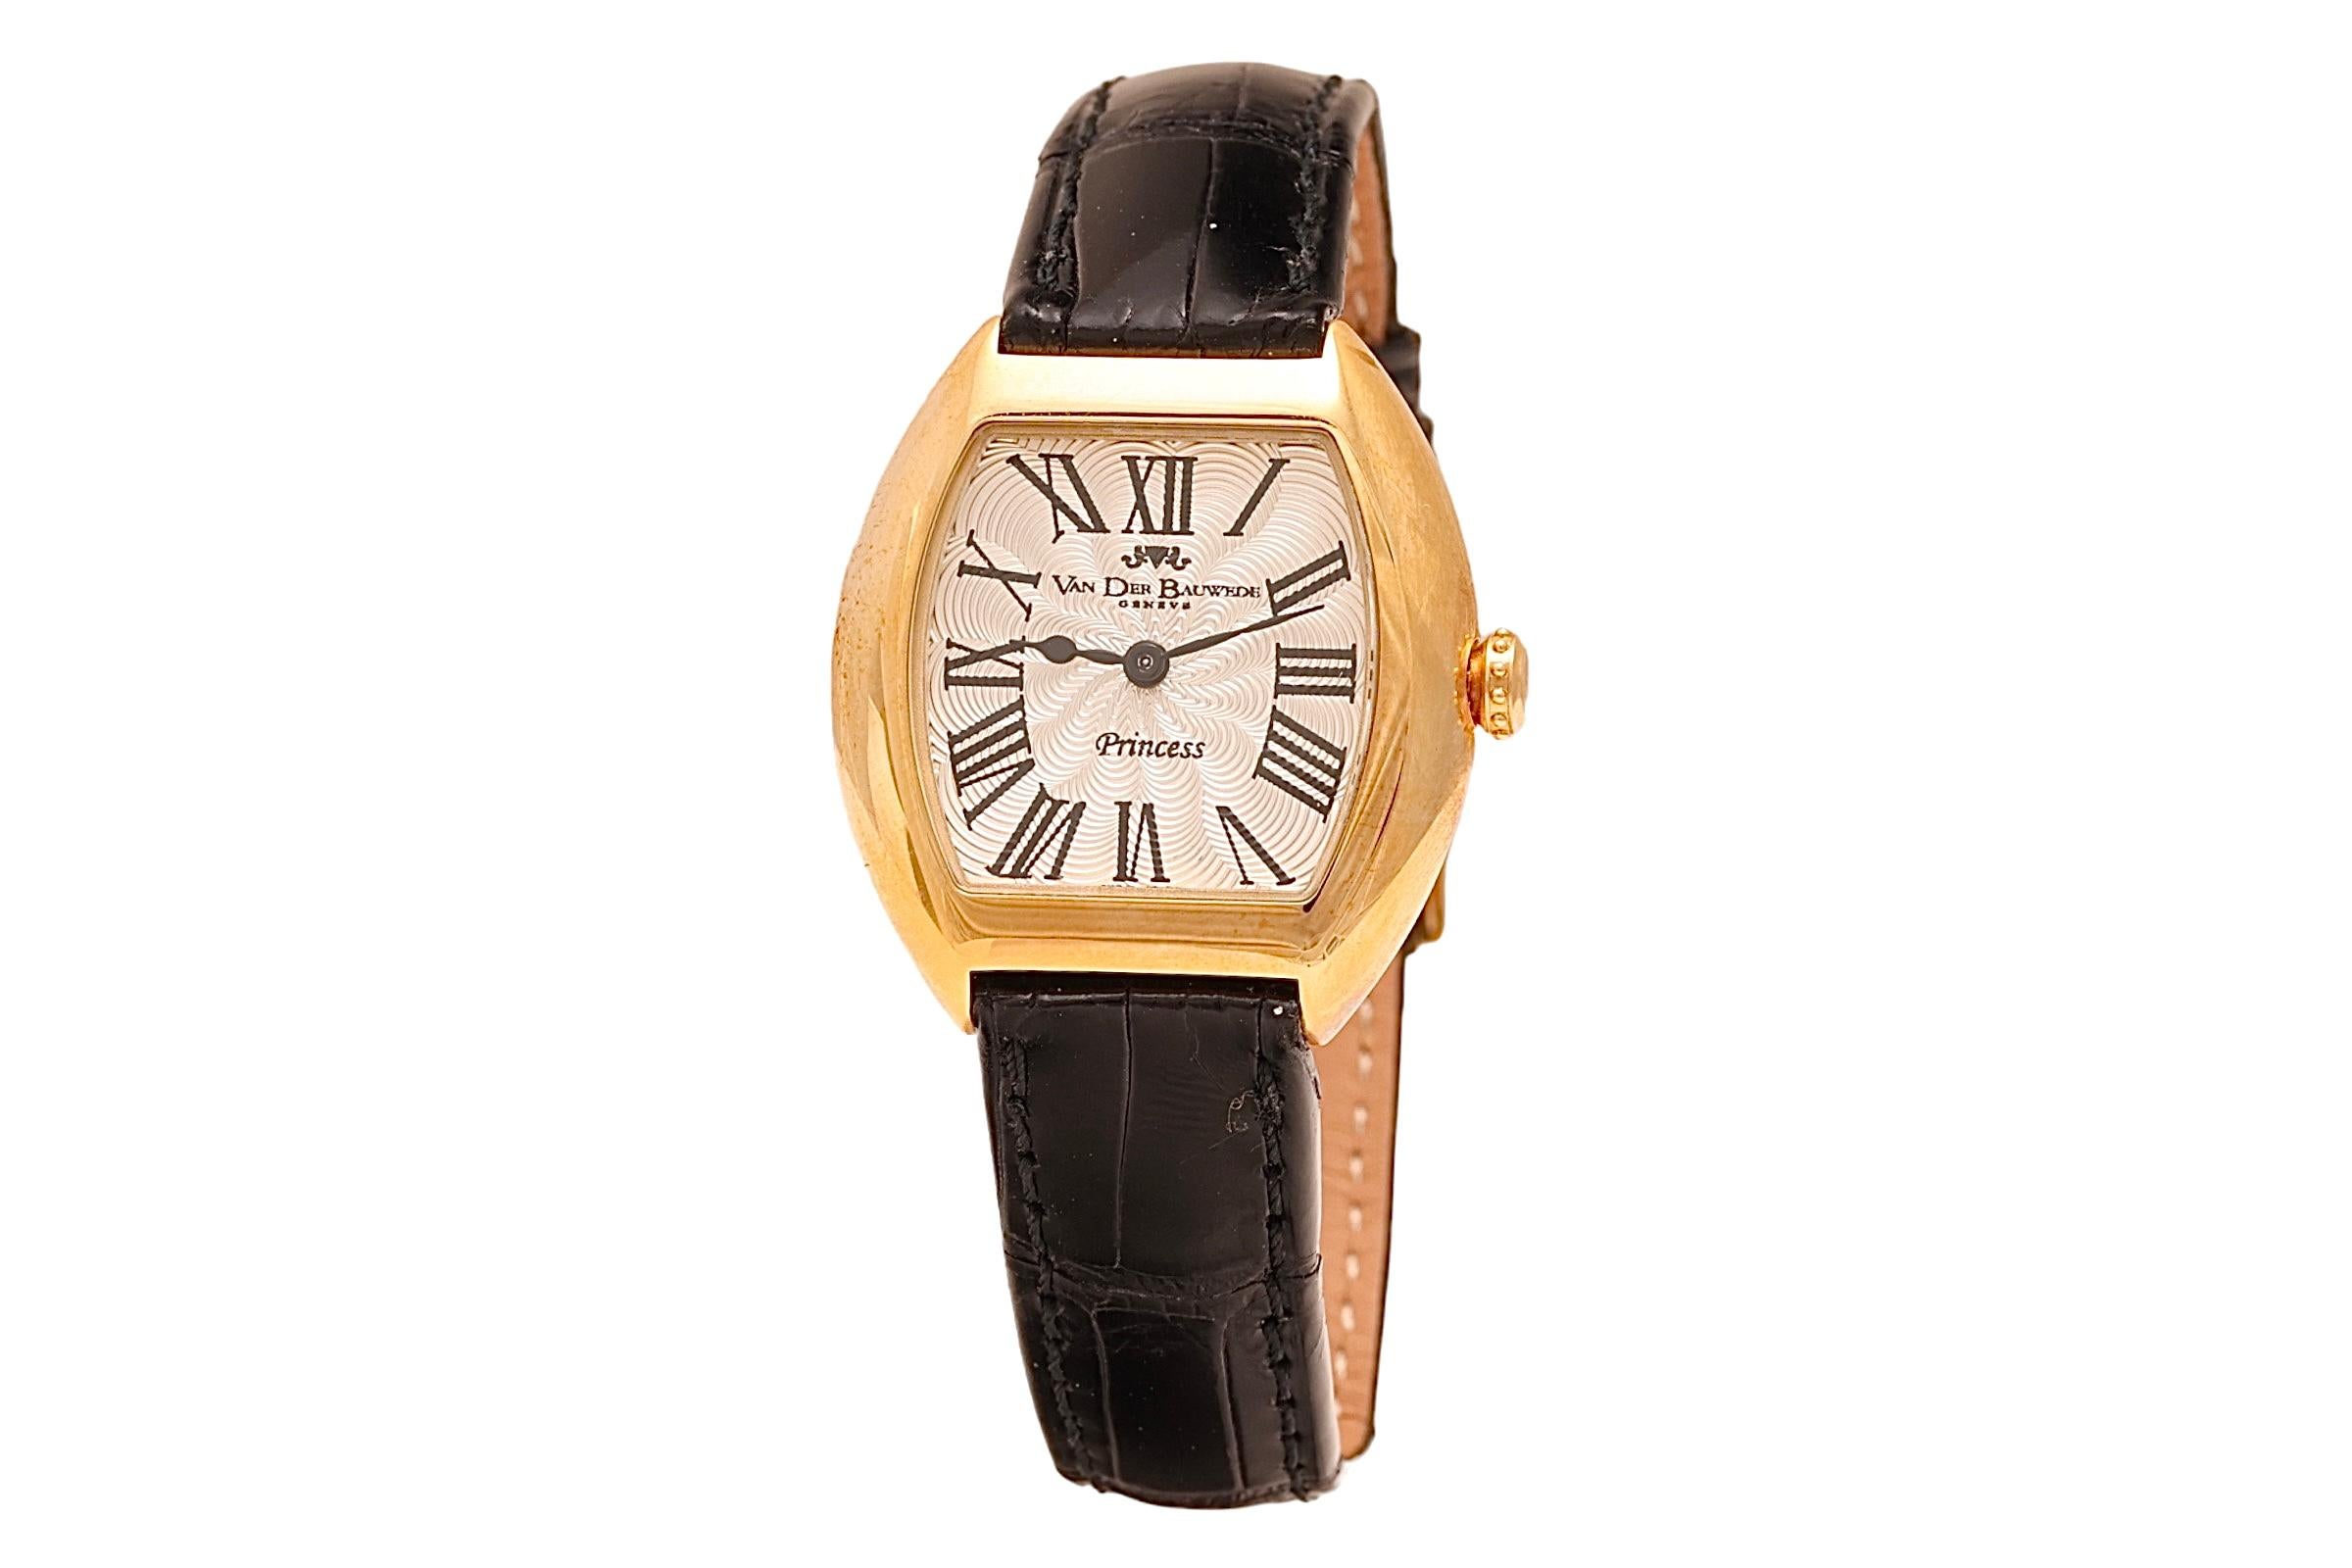 Modern New Van Der Bauwede Princess in 18kt Gold Automatic Wristwatch With Box & Papers For Sale